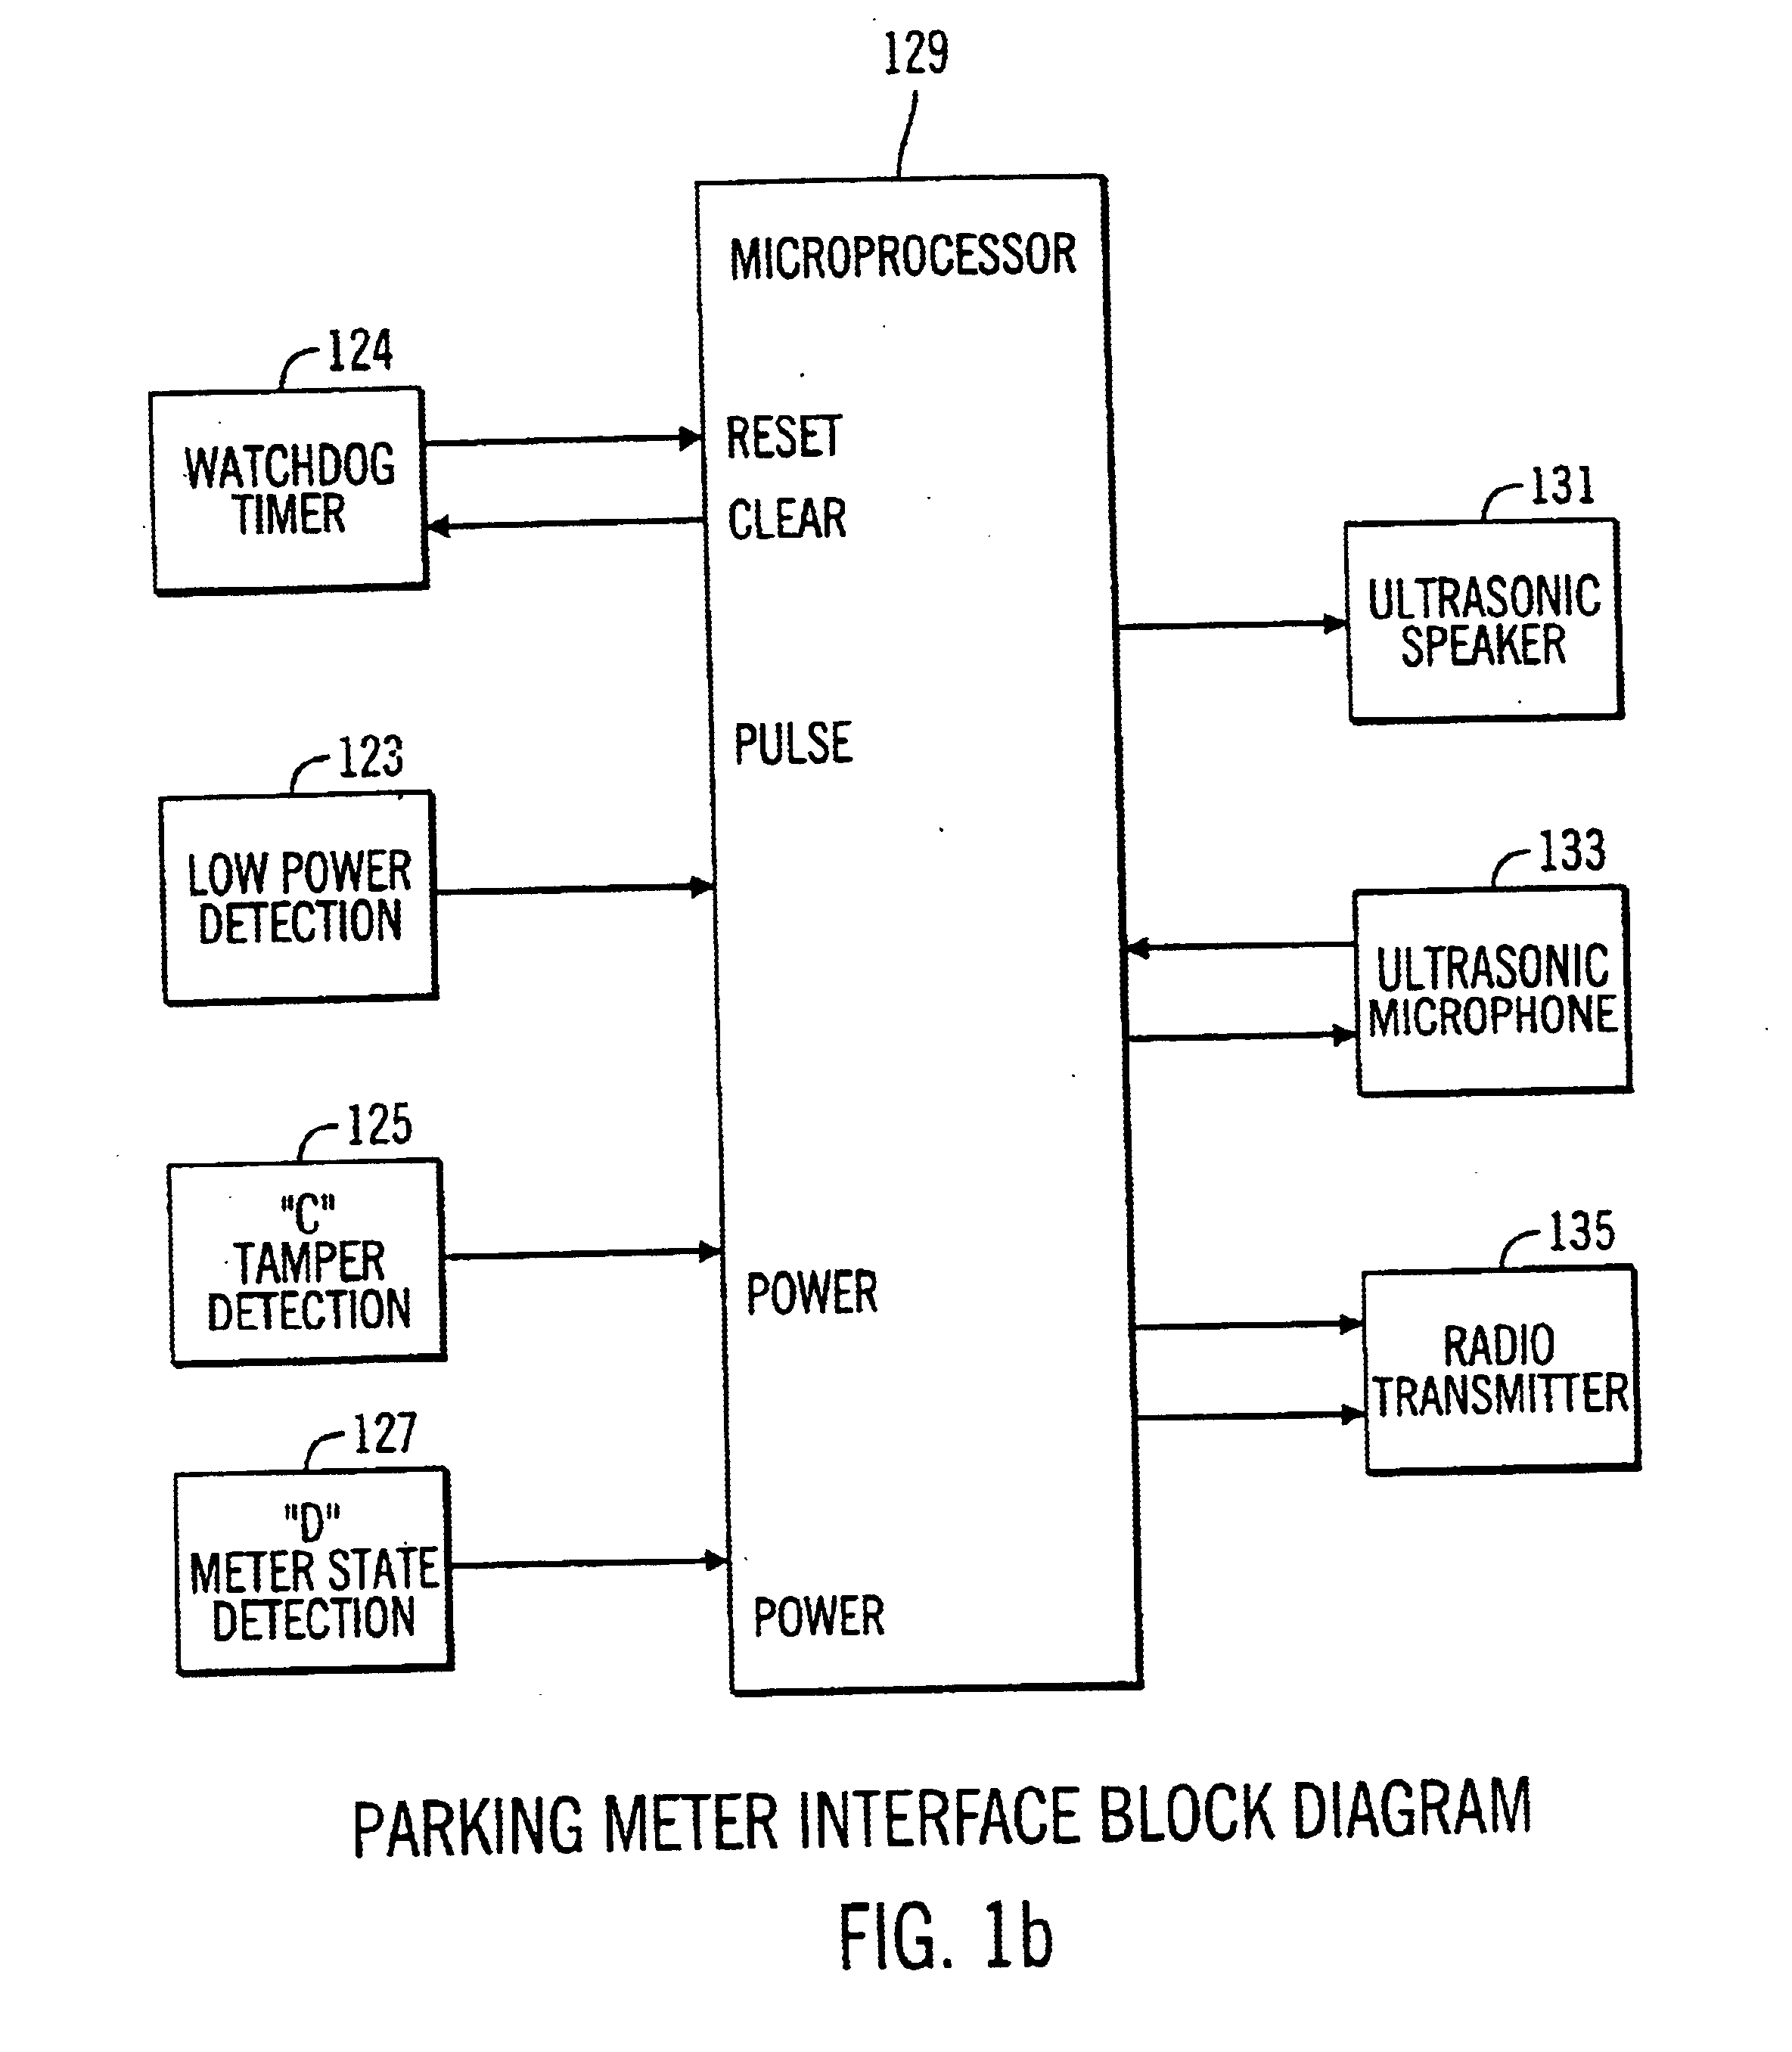 Parking meter control dispatch and information system and method